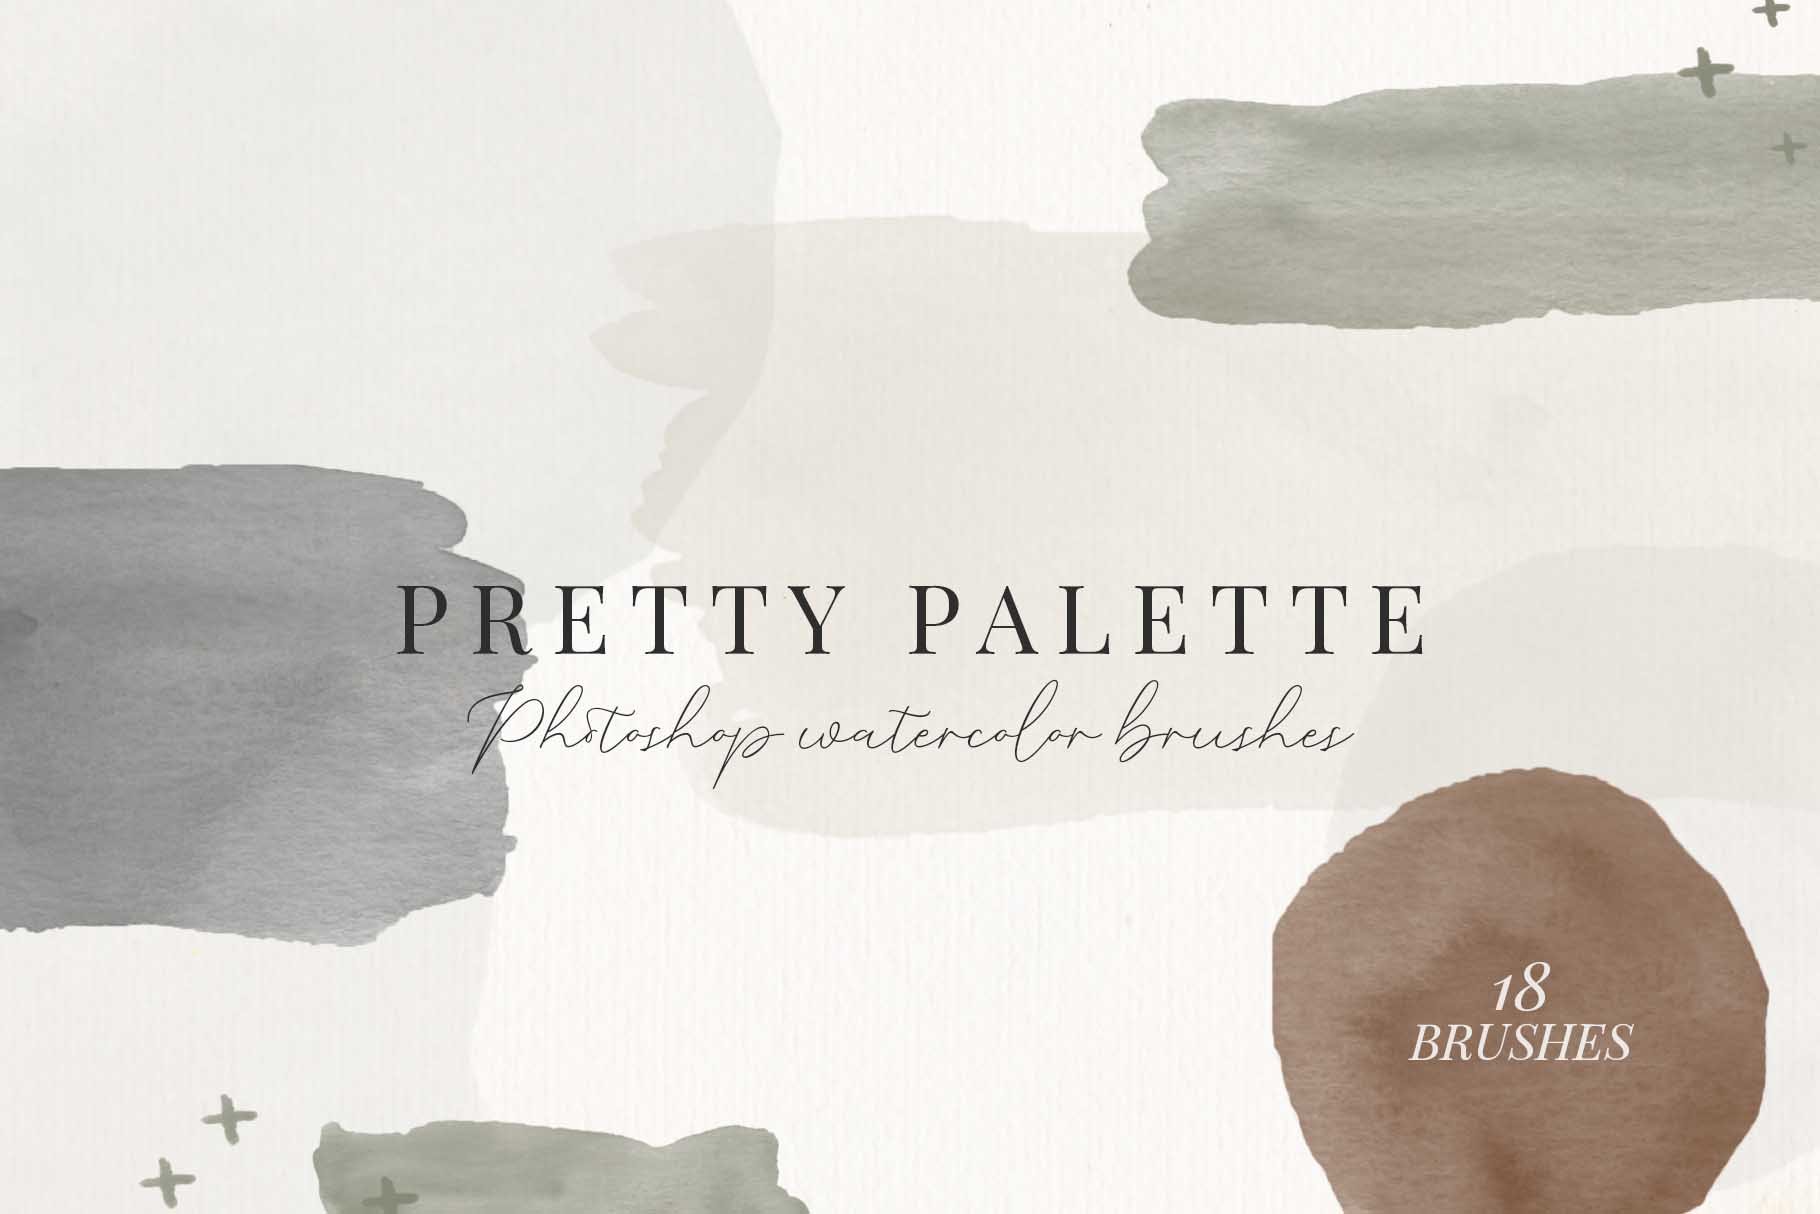 Pretty Palette PS Watercolor Brushescover image.